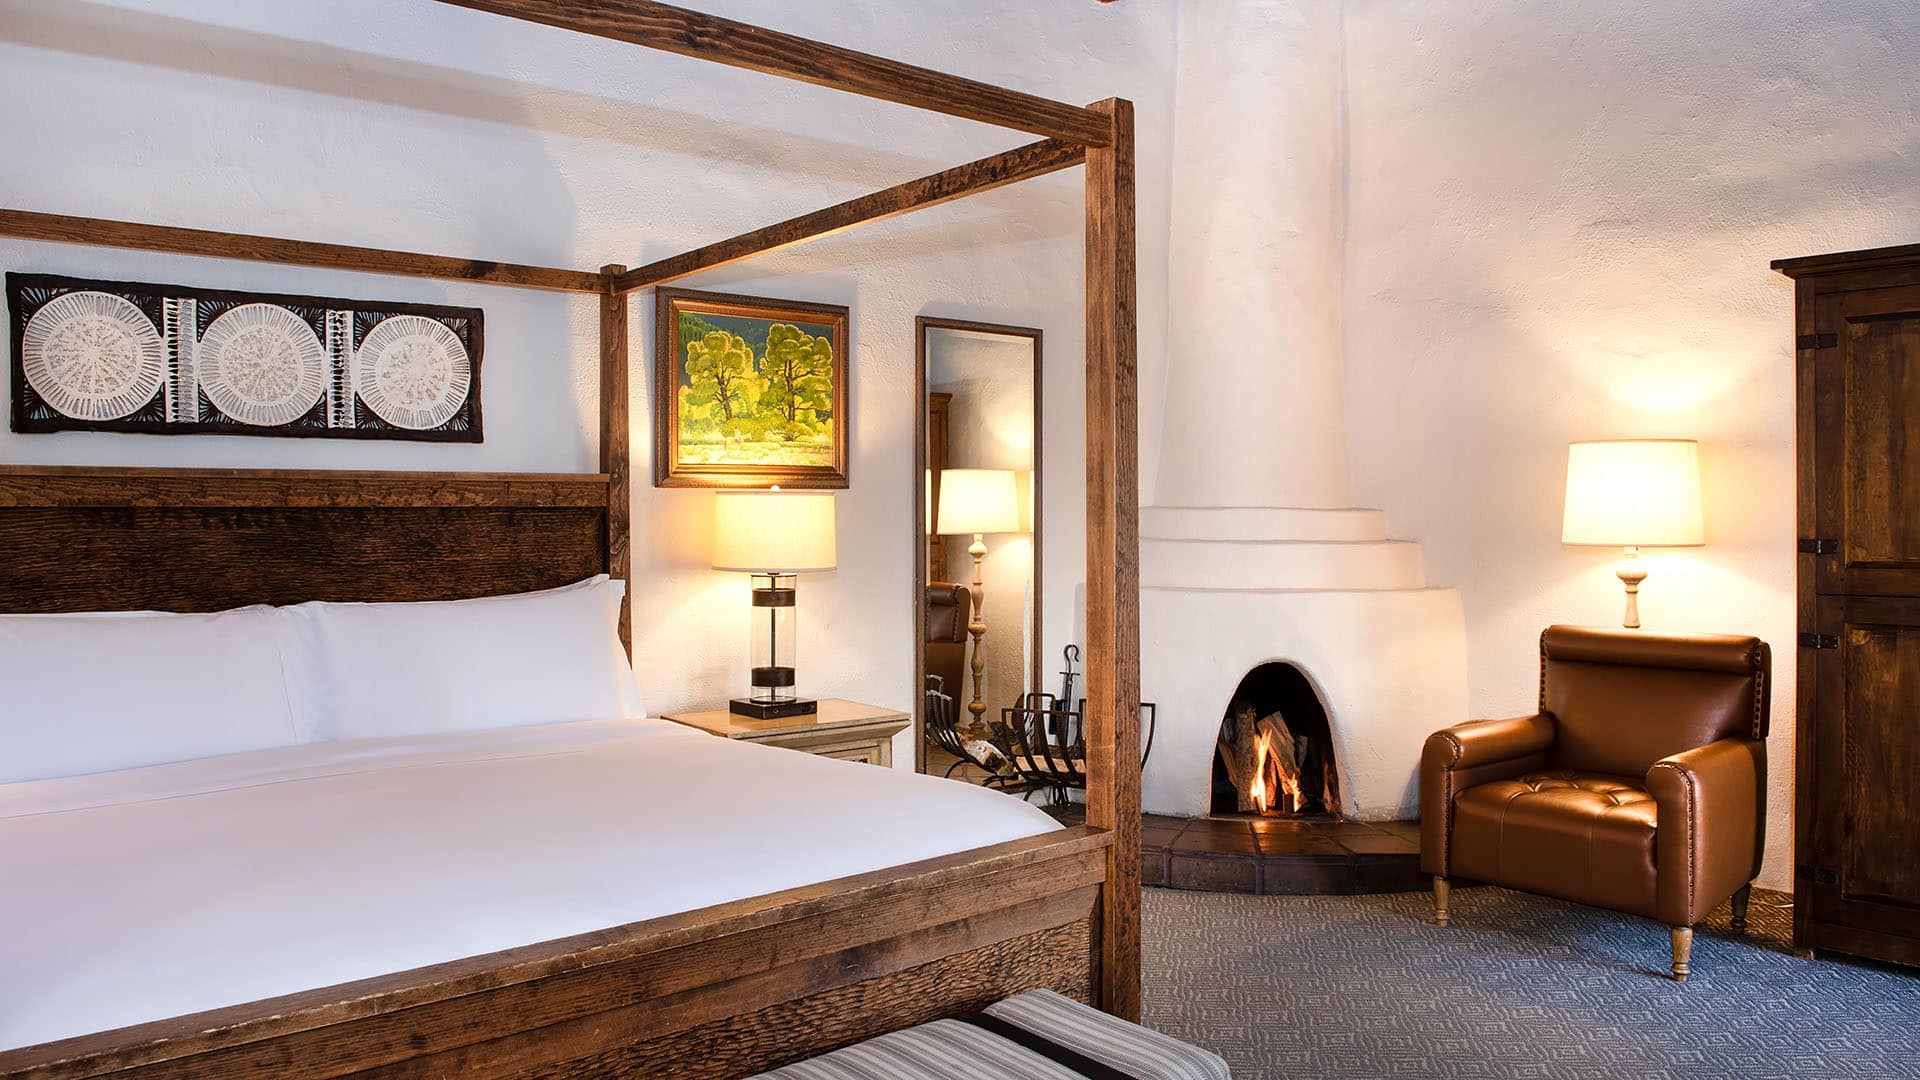 A fireplace hotel room